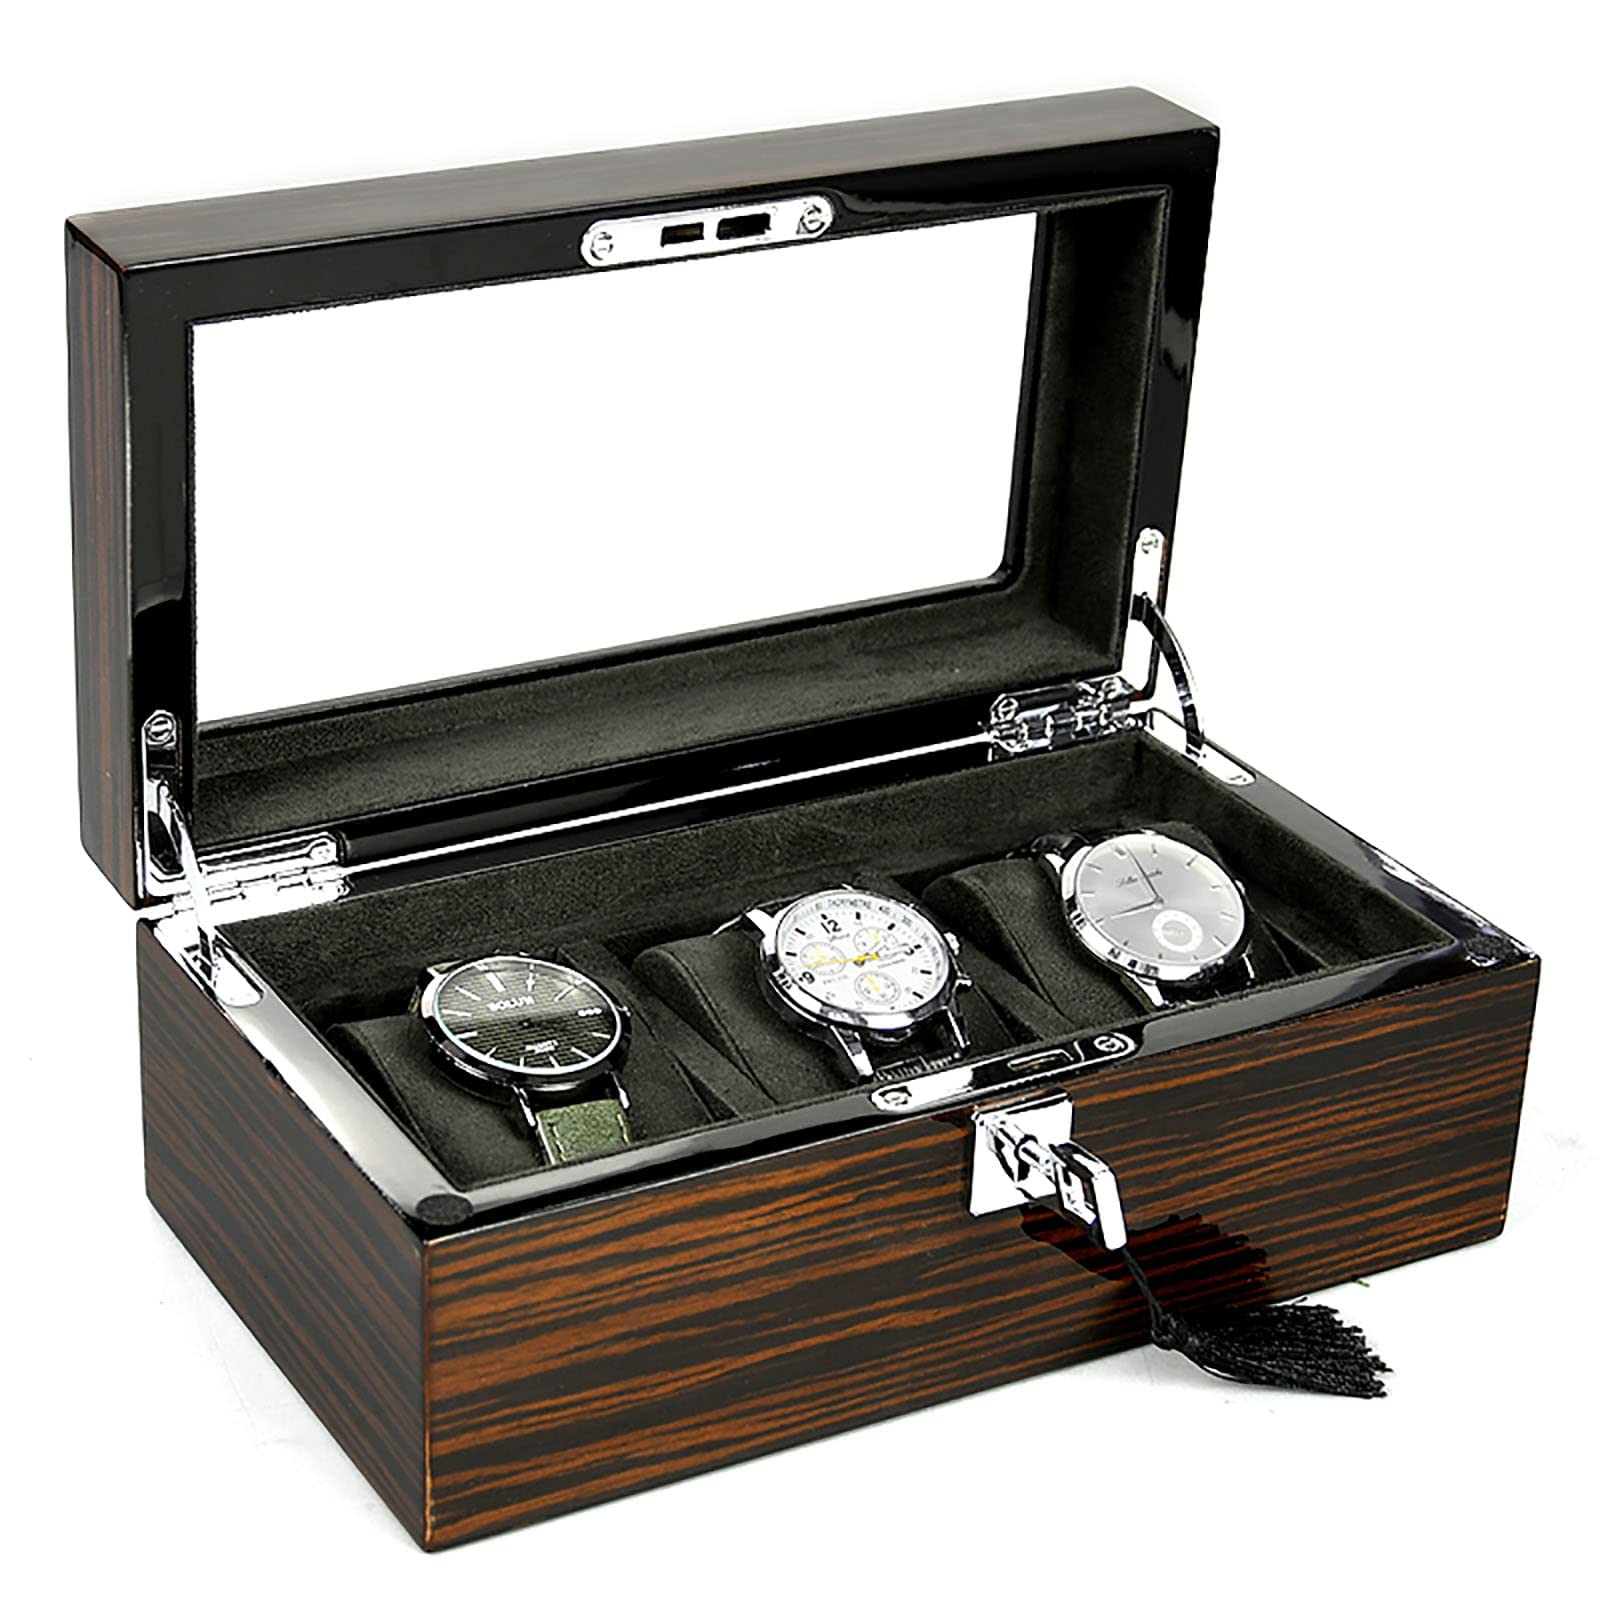 Multifunctional 3-slot Storage Case, Wooden Jewelry Crafts Watch Box, Multiple Watch Display Boxes With Lids And Keys 0130B